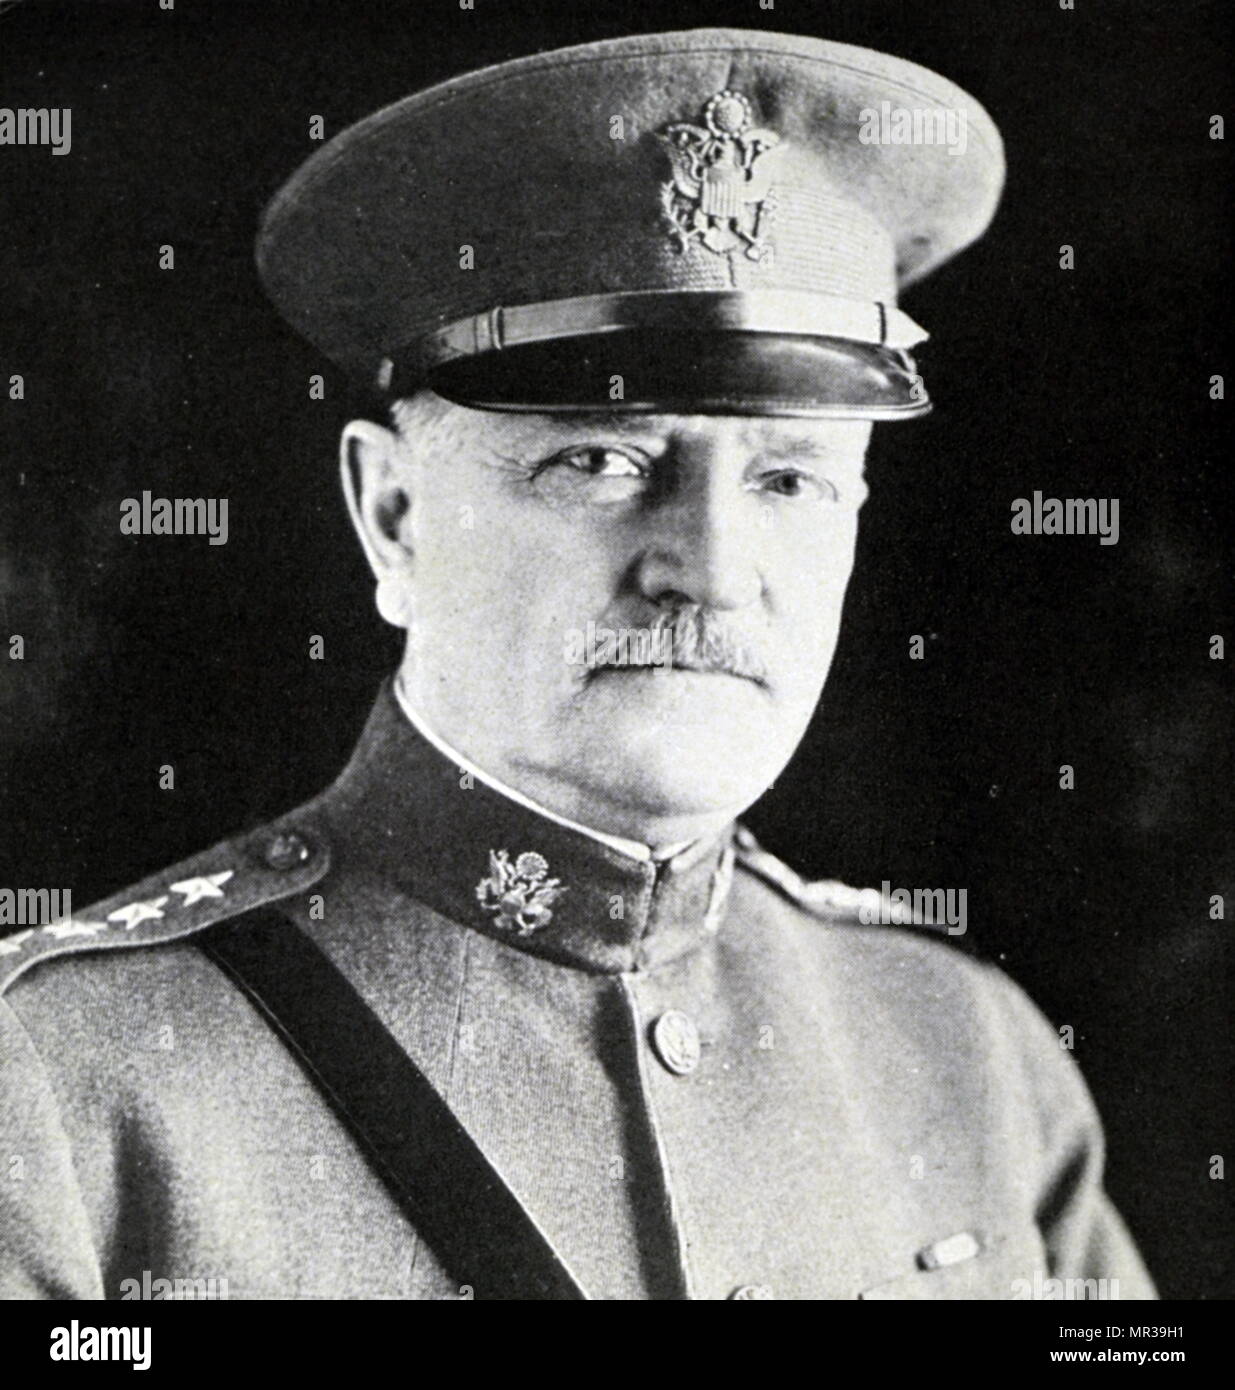 Photographic portrait of John J. Pershing (1860-1948) a senior United States Army officer. Dated 20th century Stock Photo